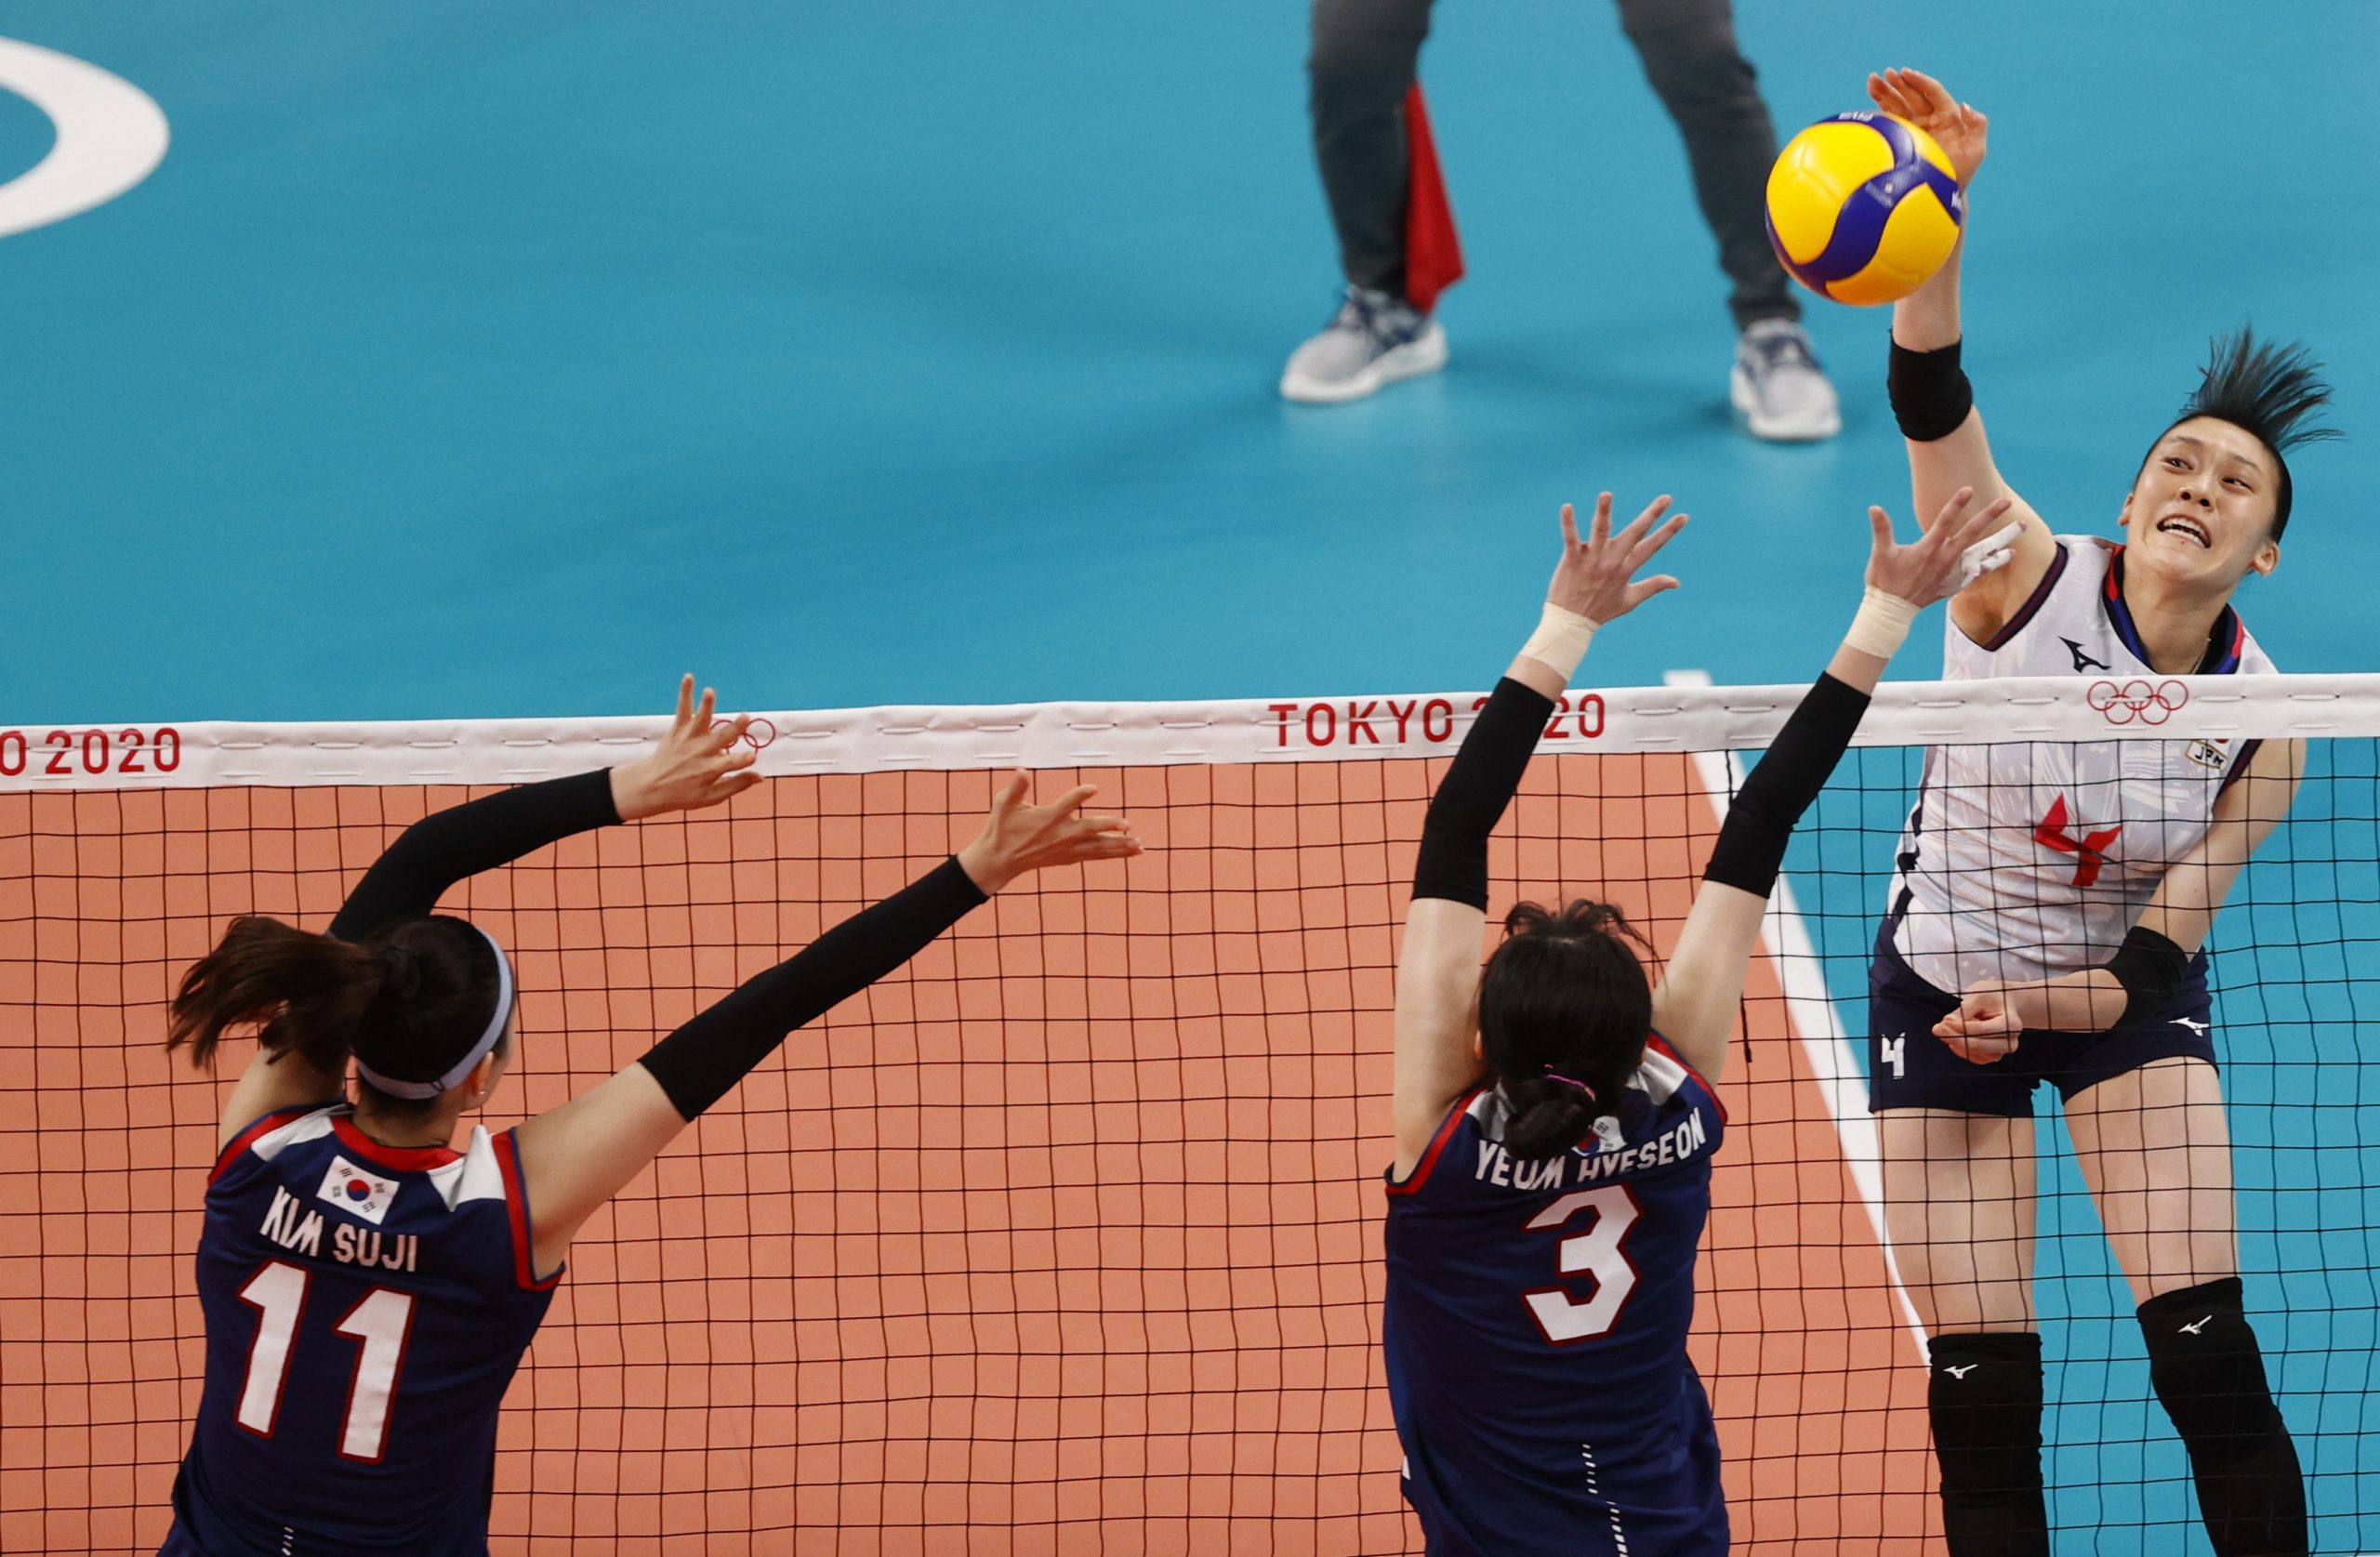 pianist Denken Wauw VOLLEYBALL | Japanese Women's Team Loses to South Korea in a Five-Set Match  | JAPAN Forward